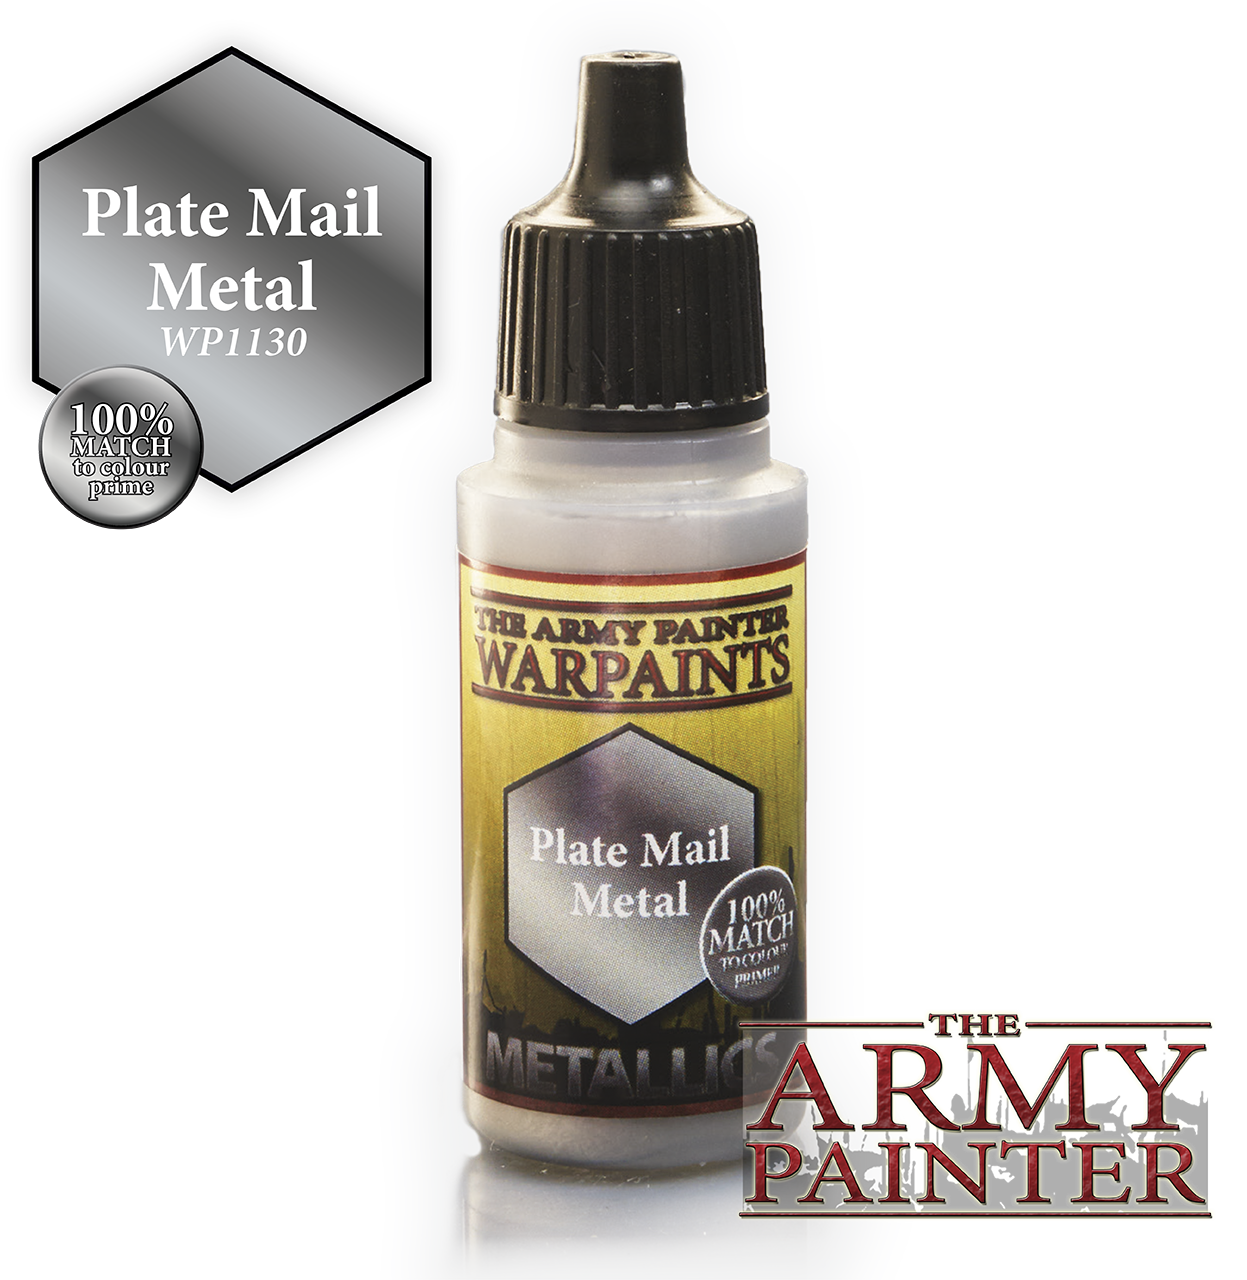 The ARMY PAINTER: Metallics Warpaints - Plate Mail Metal | Tacoma Games